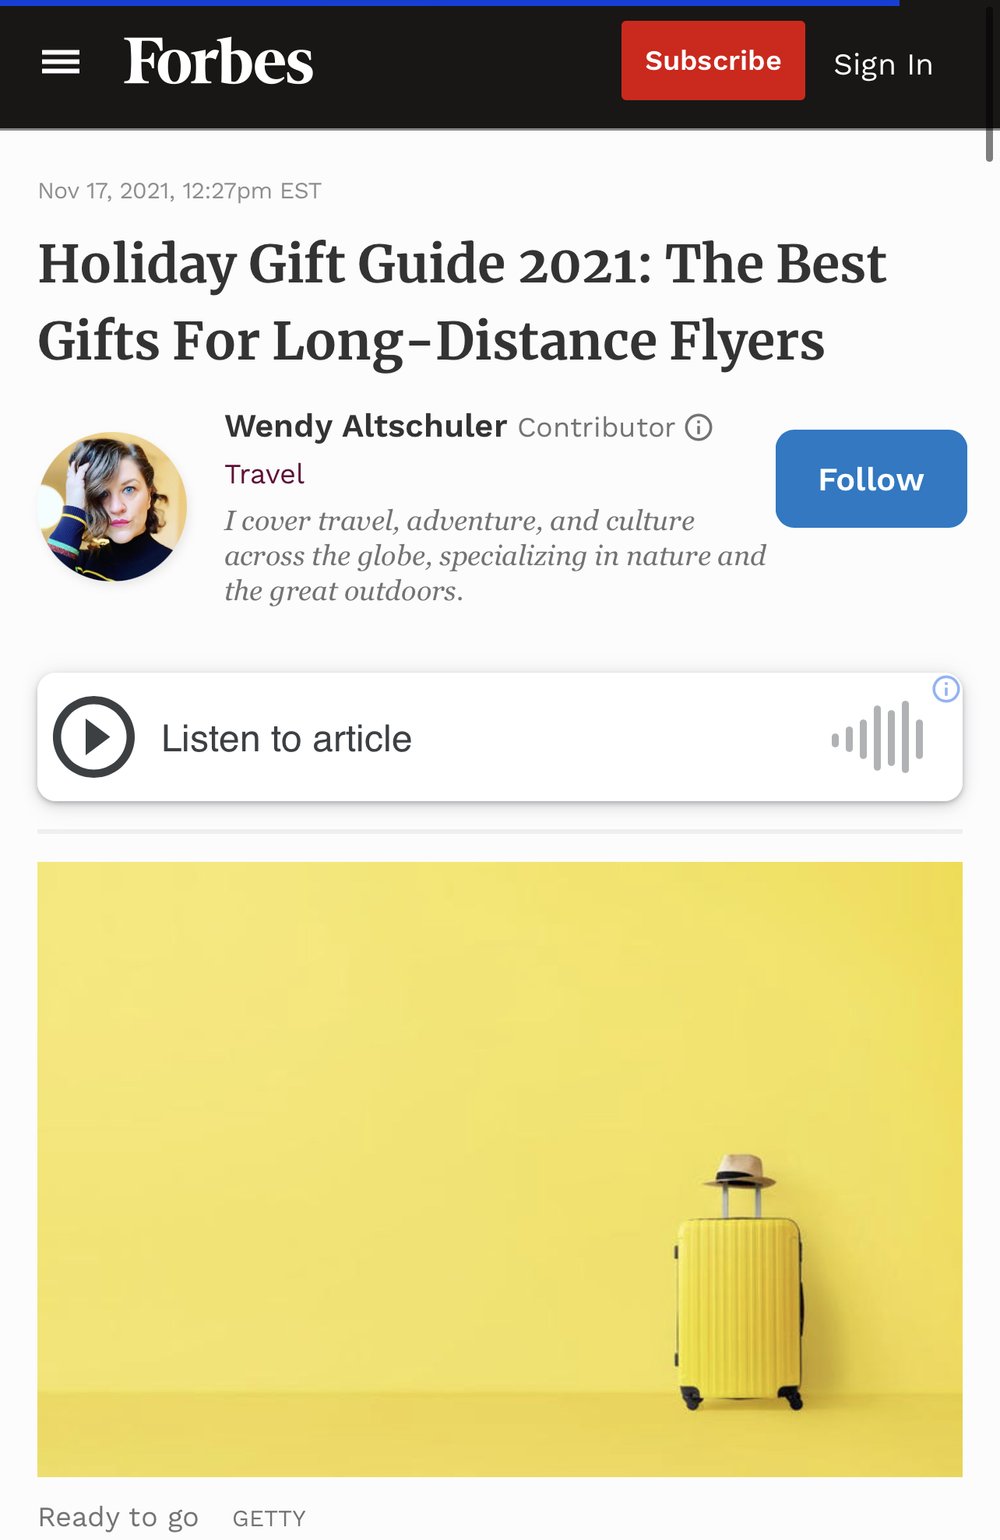 Holiday Gift Guide 2021: The Best Gifts For Long-Distance Flyers